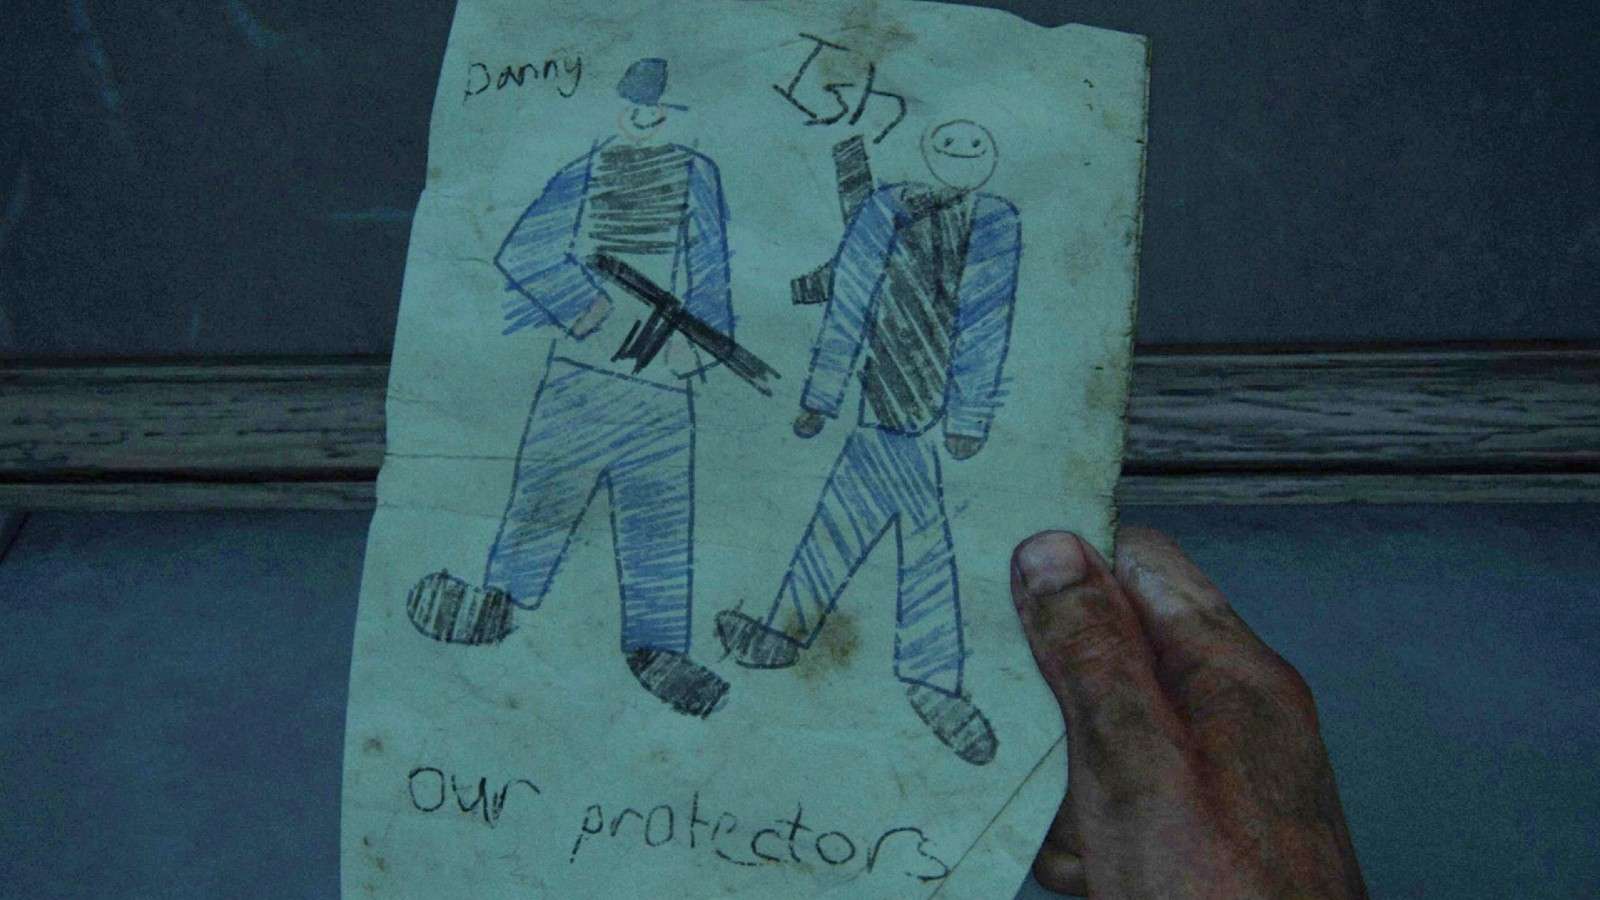 The Danny and Ish drawing in The Last of Us game